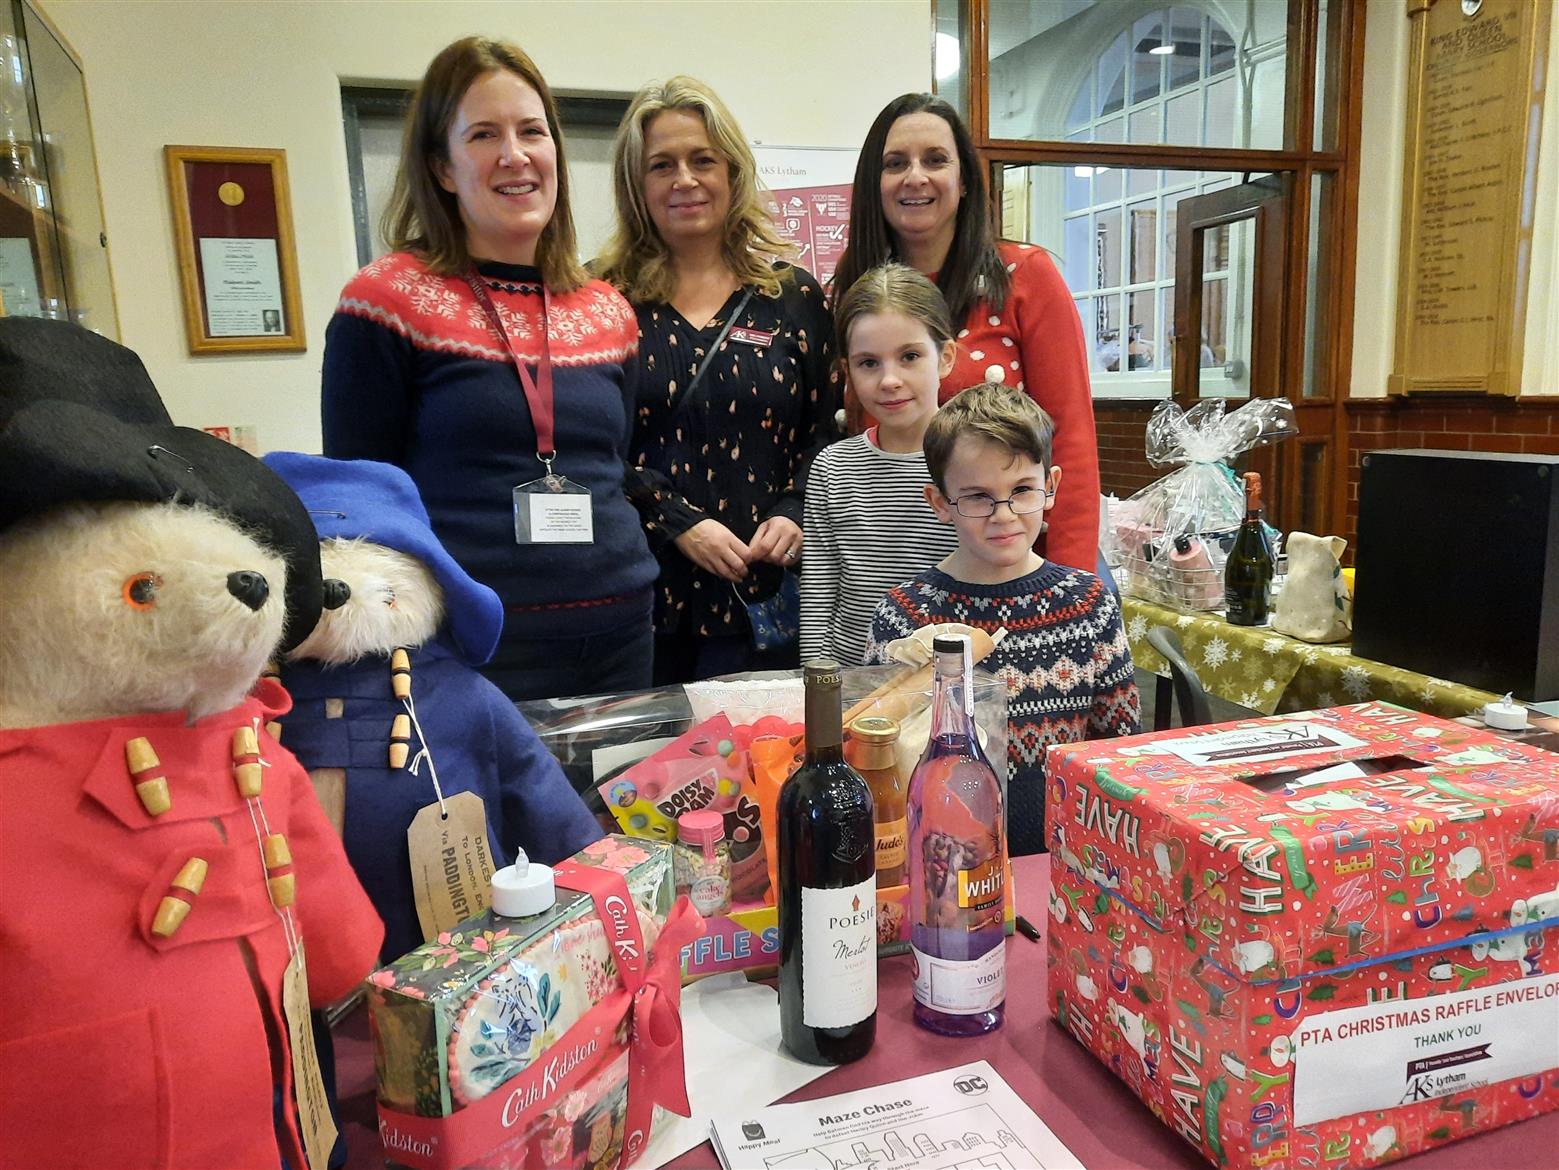 Thank you to our generous raffle prize donors at the AKS PTA Ball & Christmas Fair